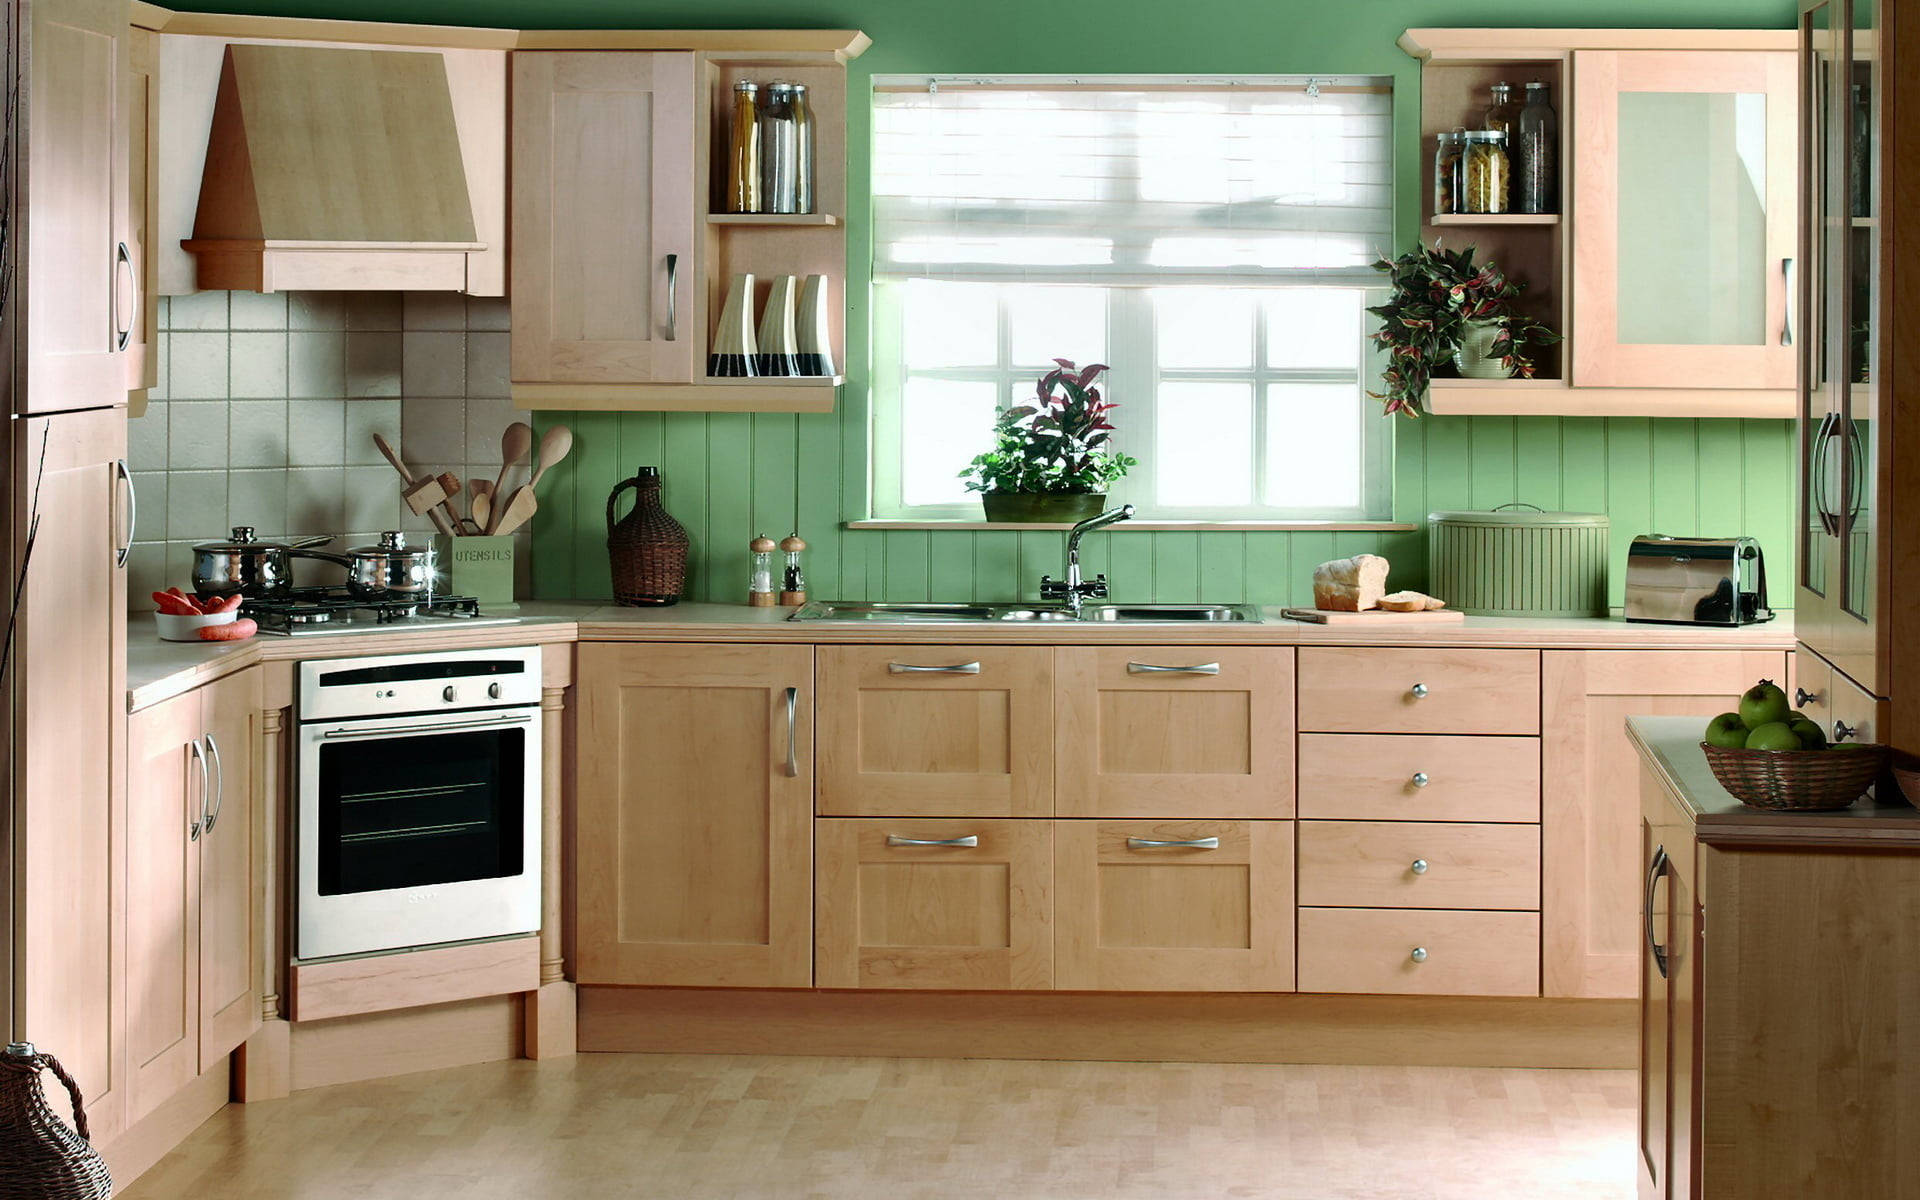 Stylish Wooden Kitchen Design Complemented by Green Walls Wallpaper